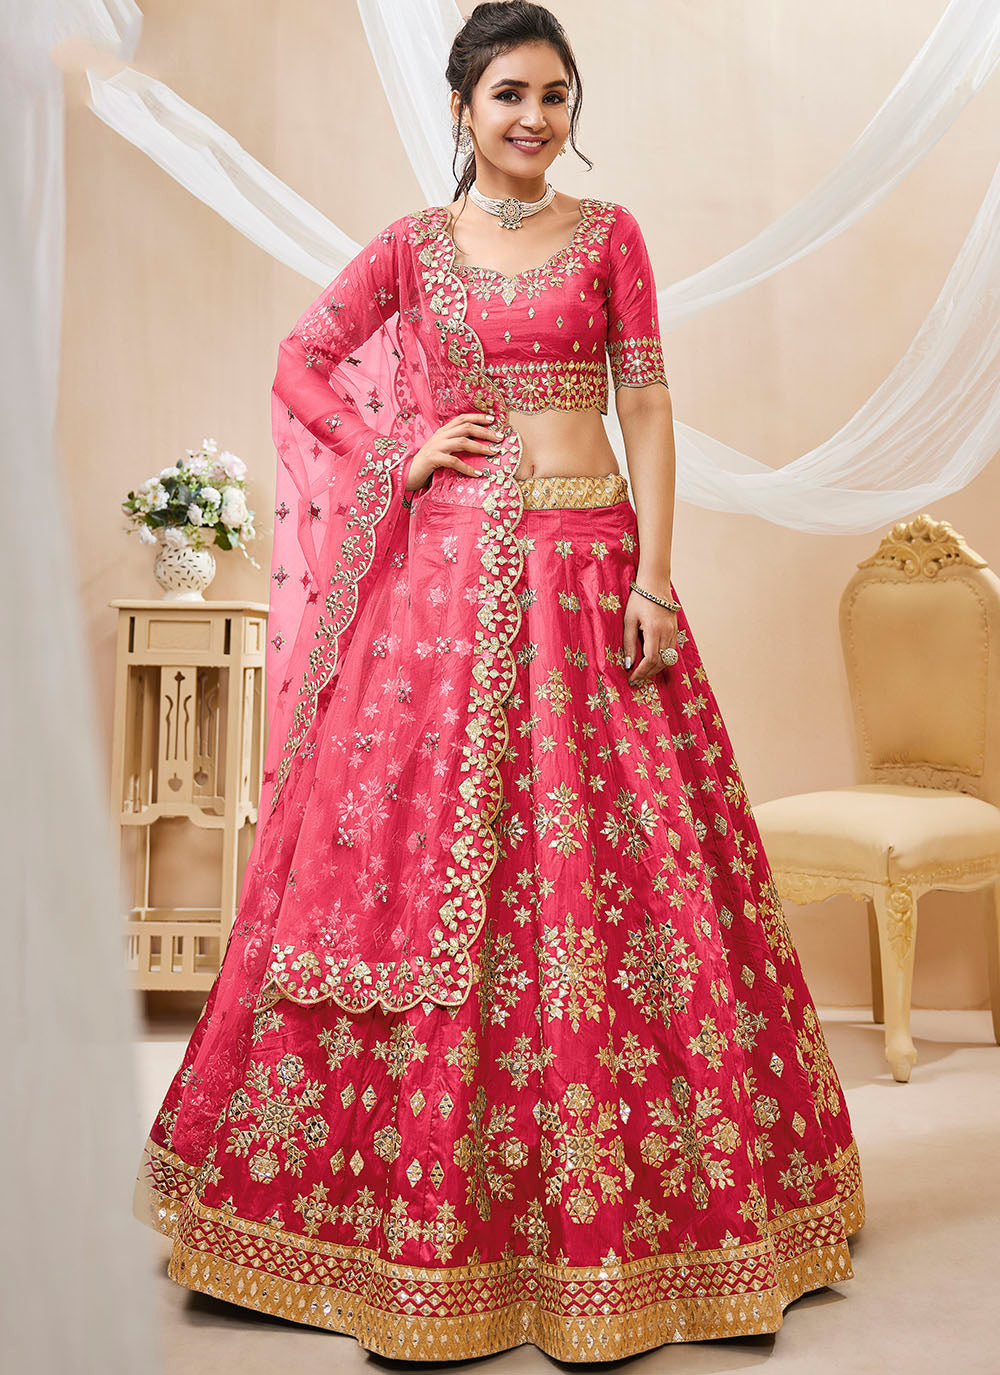 Red Bridal Indian Wedding Net Diamond & Cording Embroidered Lehenga Choli  at Rs 7525/piece | Indian Bridal Dresses. in Delhi | ID: 22817581791